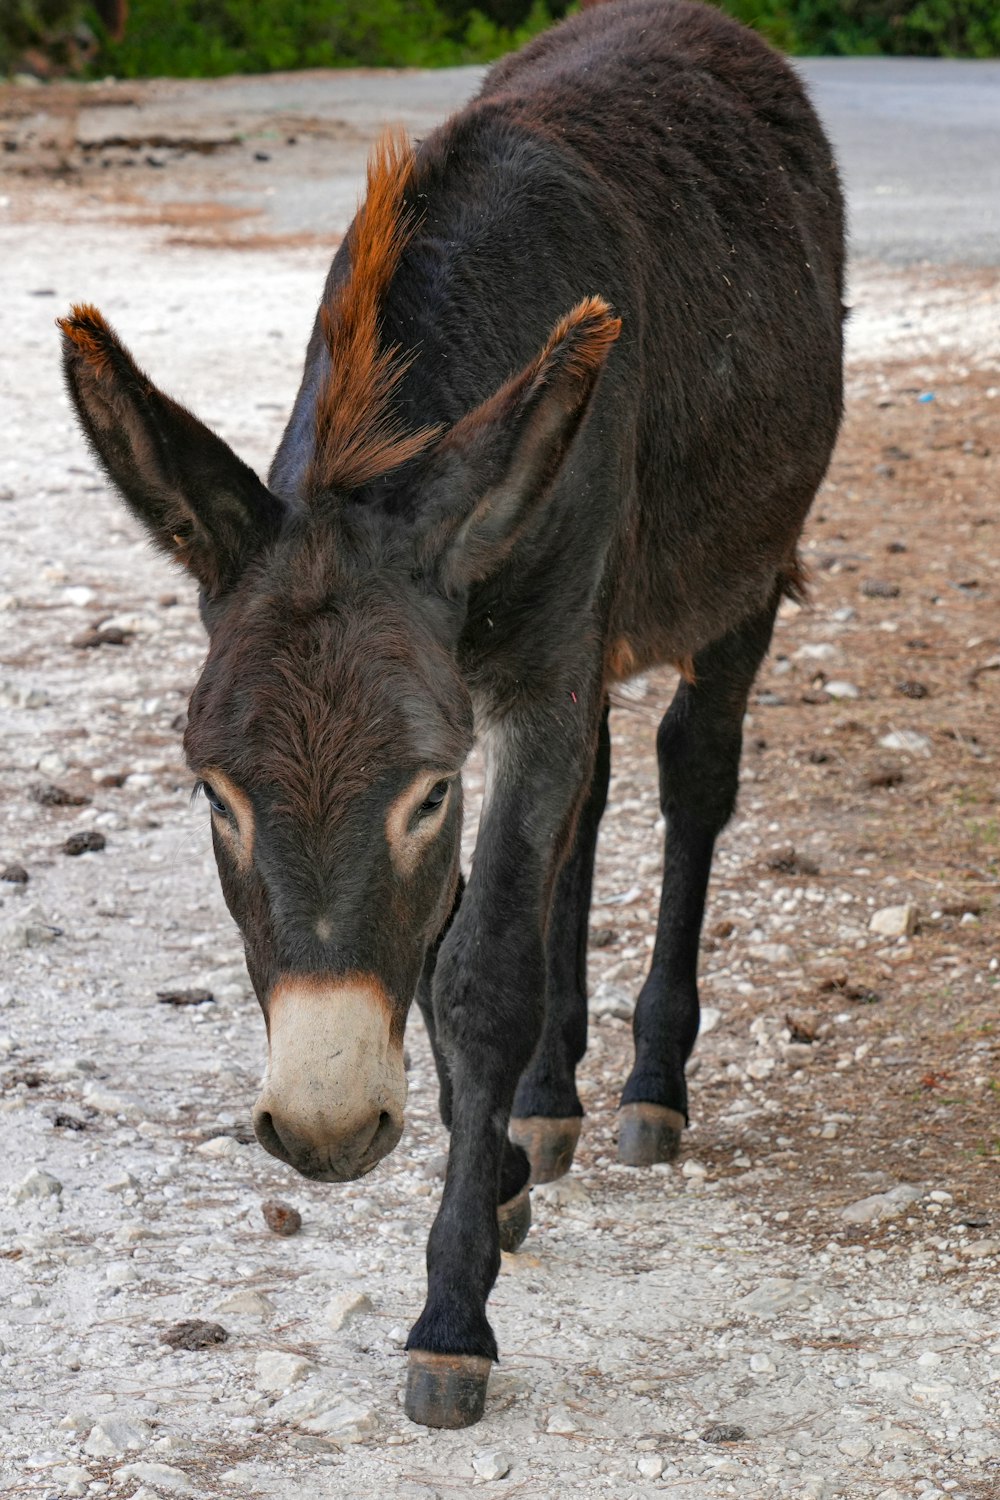 a small donkey walking on a dirt road